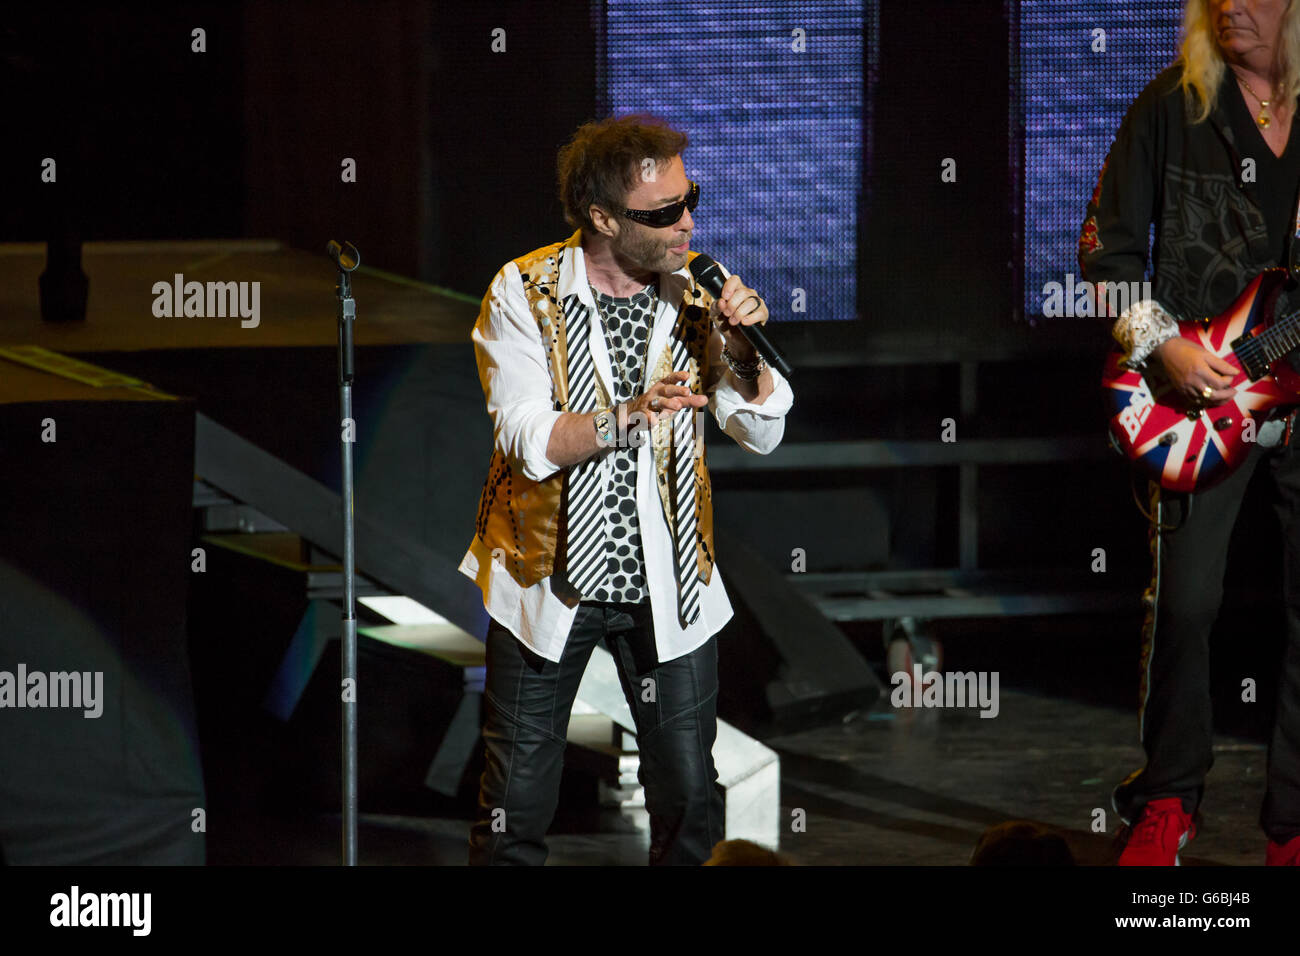 Clarkston, Michigan, USA. 22nd June, 2016. PAUL RODGERS of BAD COMPANY performing on the ''One Hell Of A Night Tour'' at DTE Energy Music Theatre in Clarkston, MI on June 22nd 2016 © Marc Nader/ZUMA Wire/Alamy Live News Stock Photo